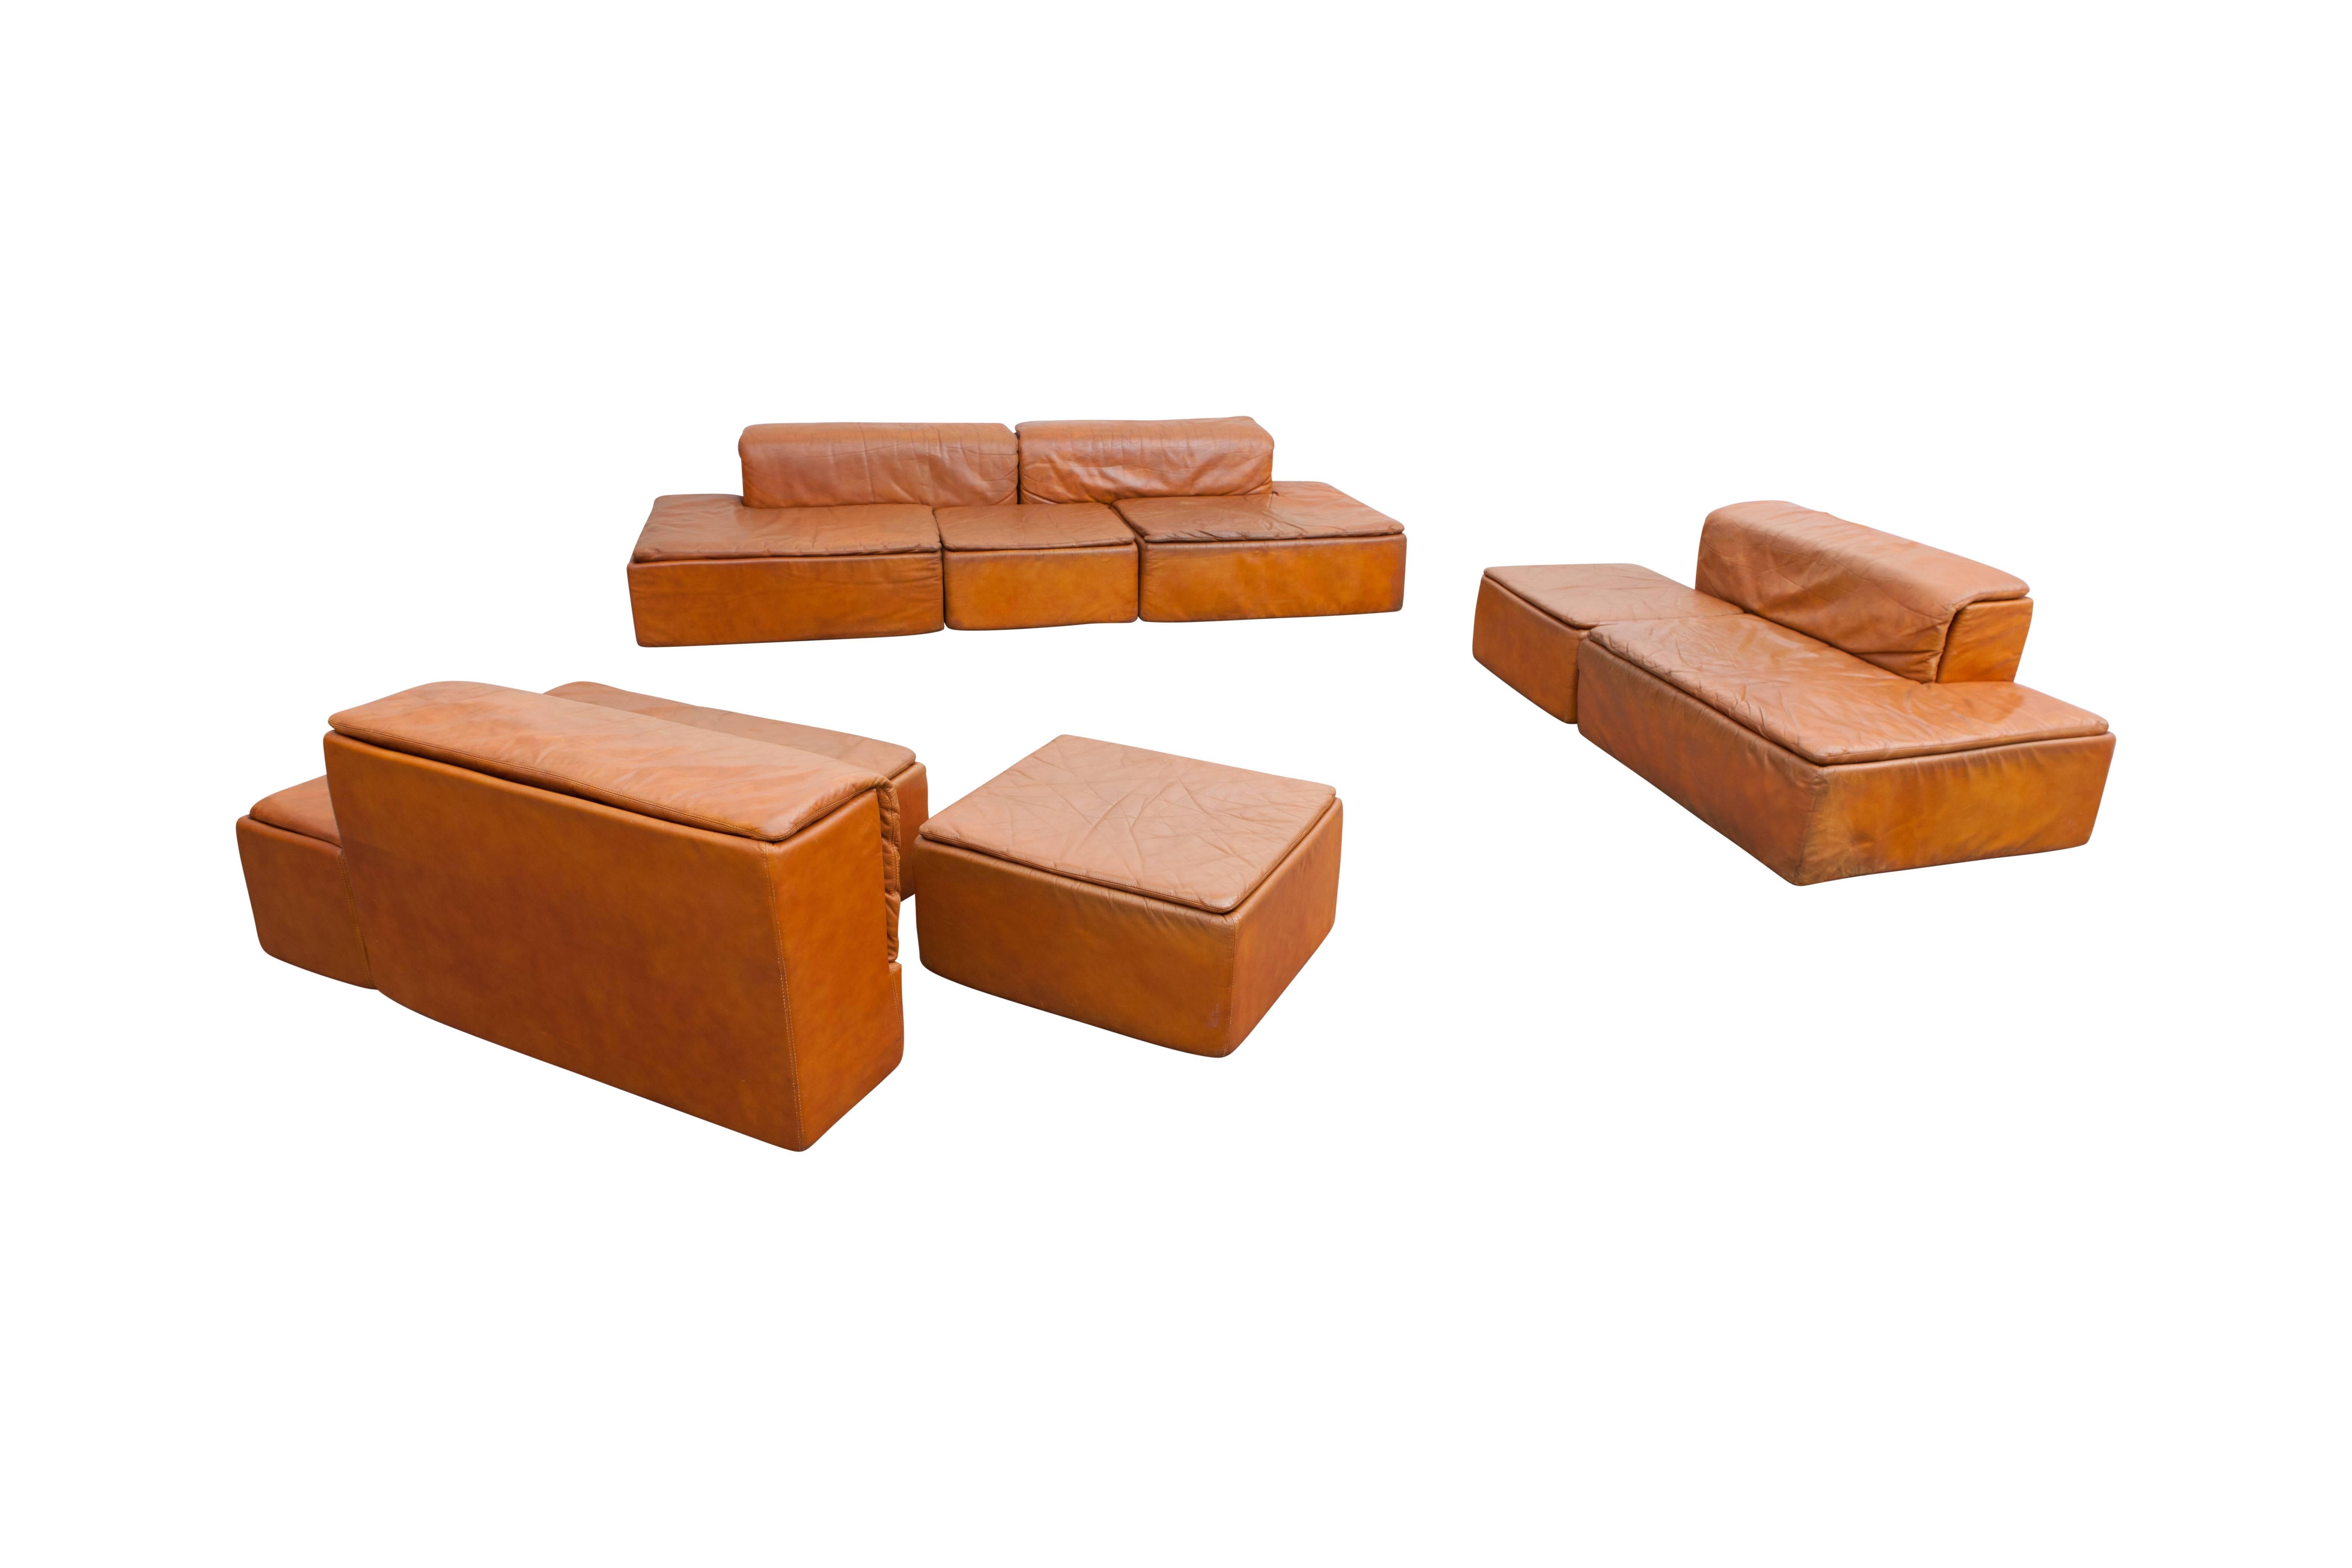 Modular Set of “Paione” Leather Sofa’s by Claudio Salocchi for Sormani 1